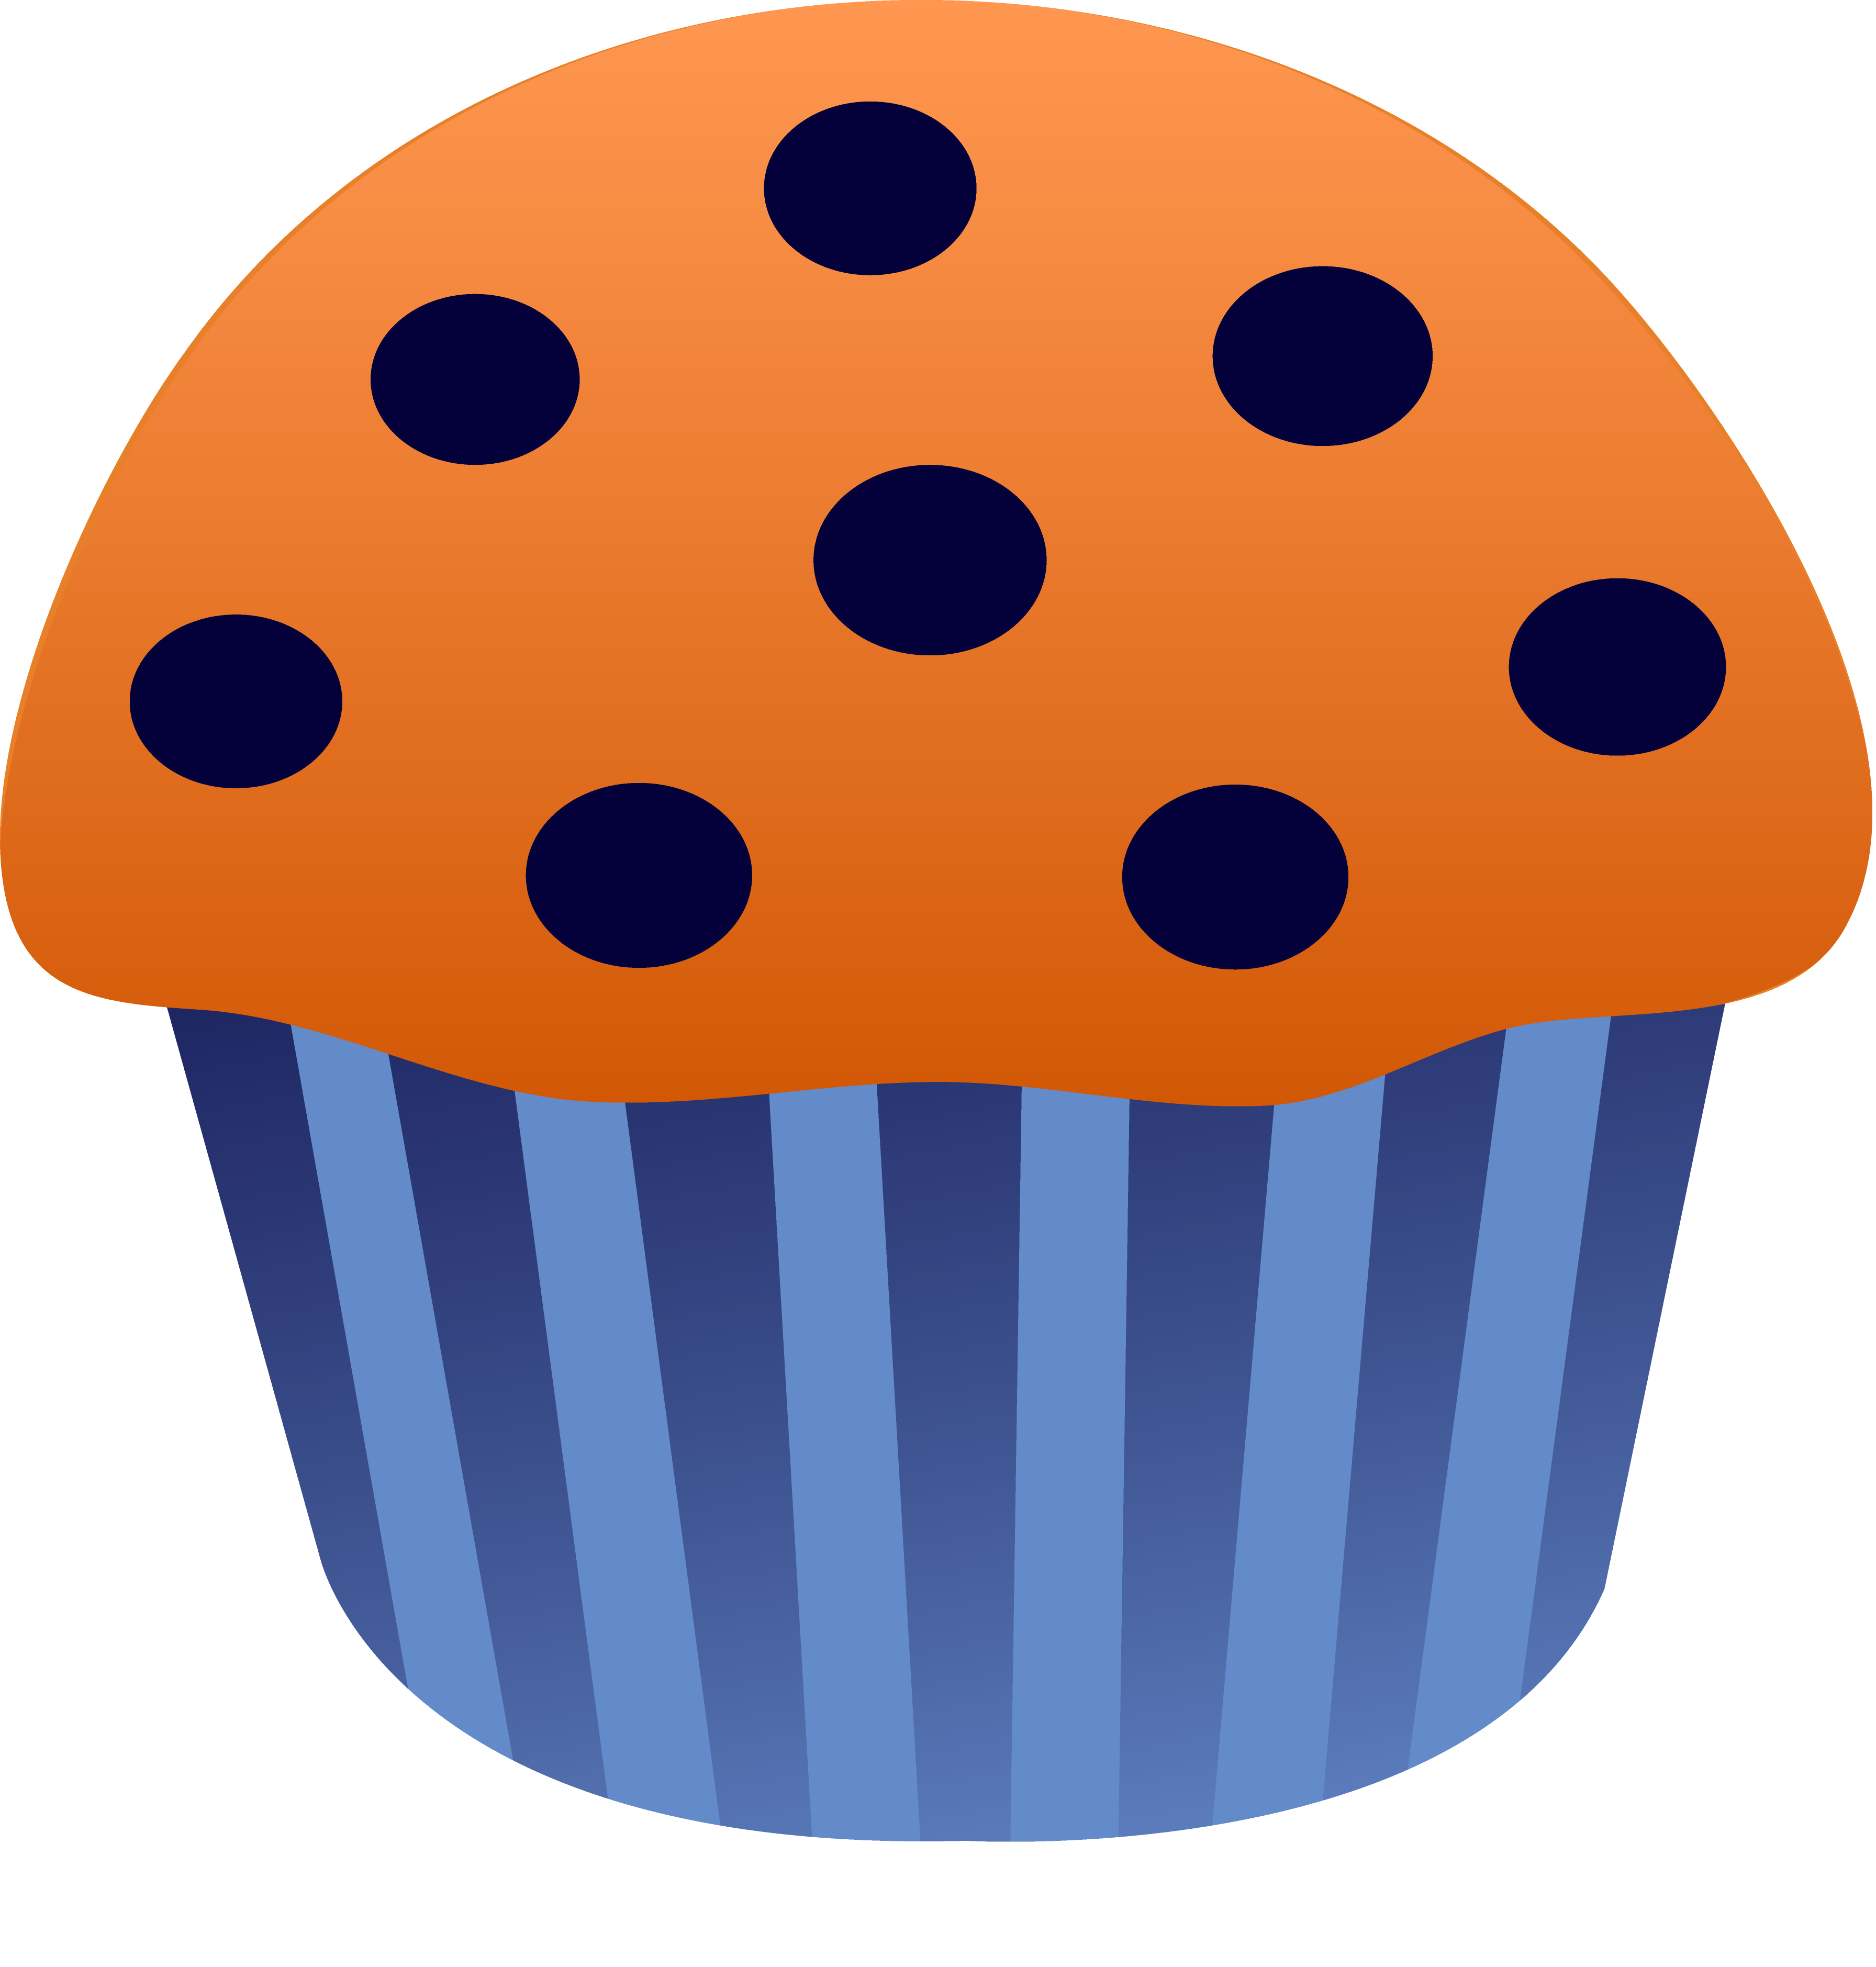 Free Muffins Cliparts, Download Free Clip Art, Free Clip Art.